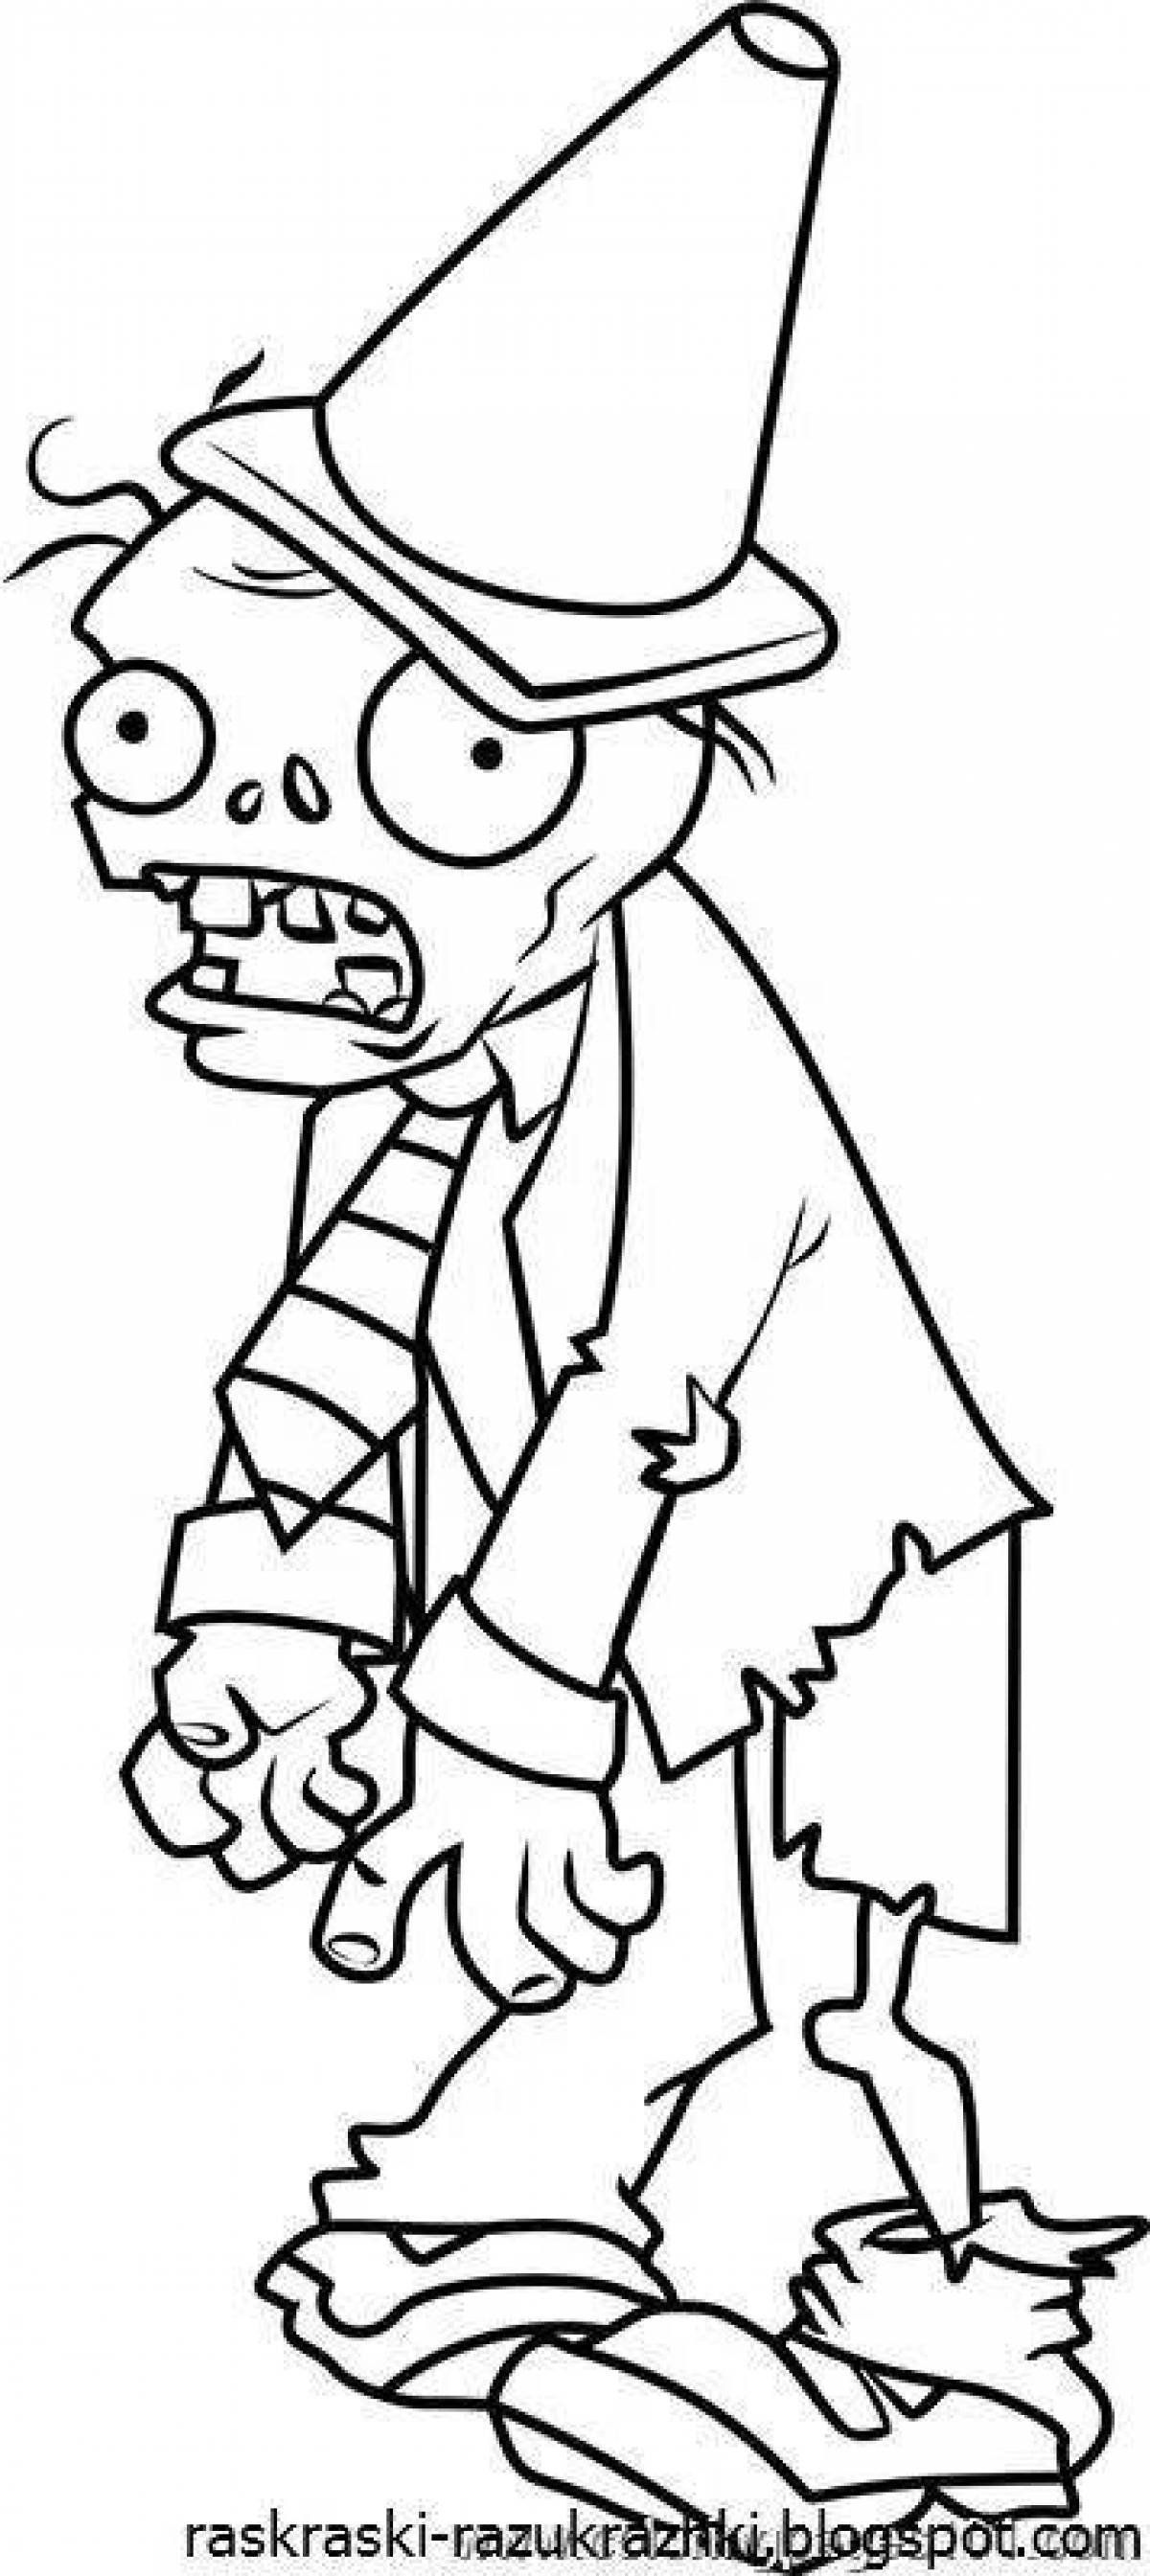 Zombie nasty coloring book for kids